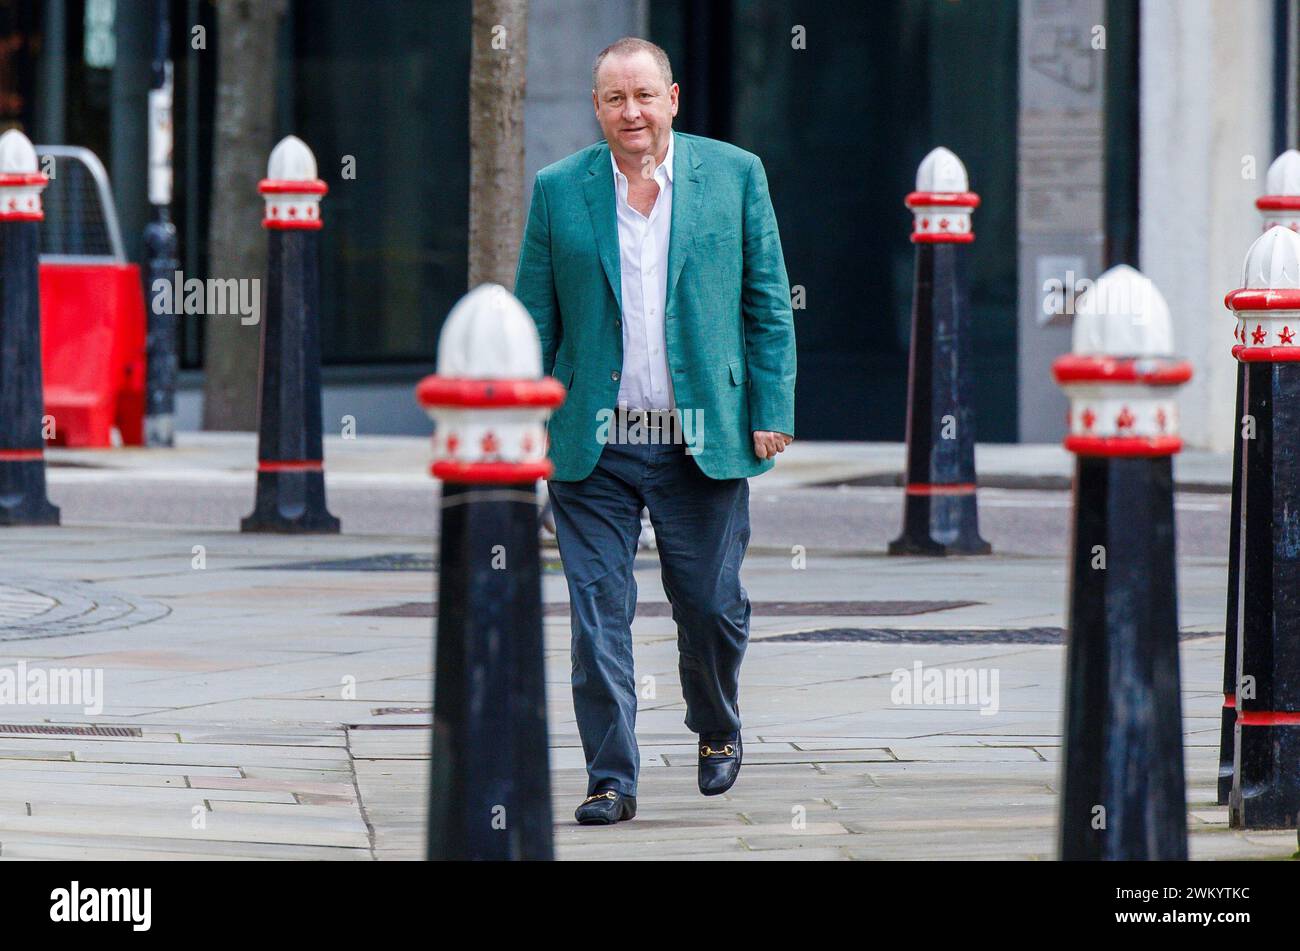 London, UK 23 Feb 2024 Mike Ashley arrives at the High Court. Mike Ashley's company, Fraser Group, is taking Morgan Stanley to court. Mike Ashley's Frasers Group has accused Morgan Stanley of “snobbery” over its decision to impose a $1bn margin call, claiming the bank's move was driven partly by the entrepreneur's humble beginnings. Mike Ashley said Morgan Stanley sought to force the UK retailer out of a position it held in German brand Hugo Boss and said the demand for collateral was completely unbelievable. The dispute relates to long positions Frasers started to accumulate in Hugo Boss fr Stock Photo